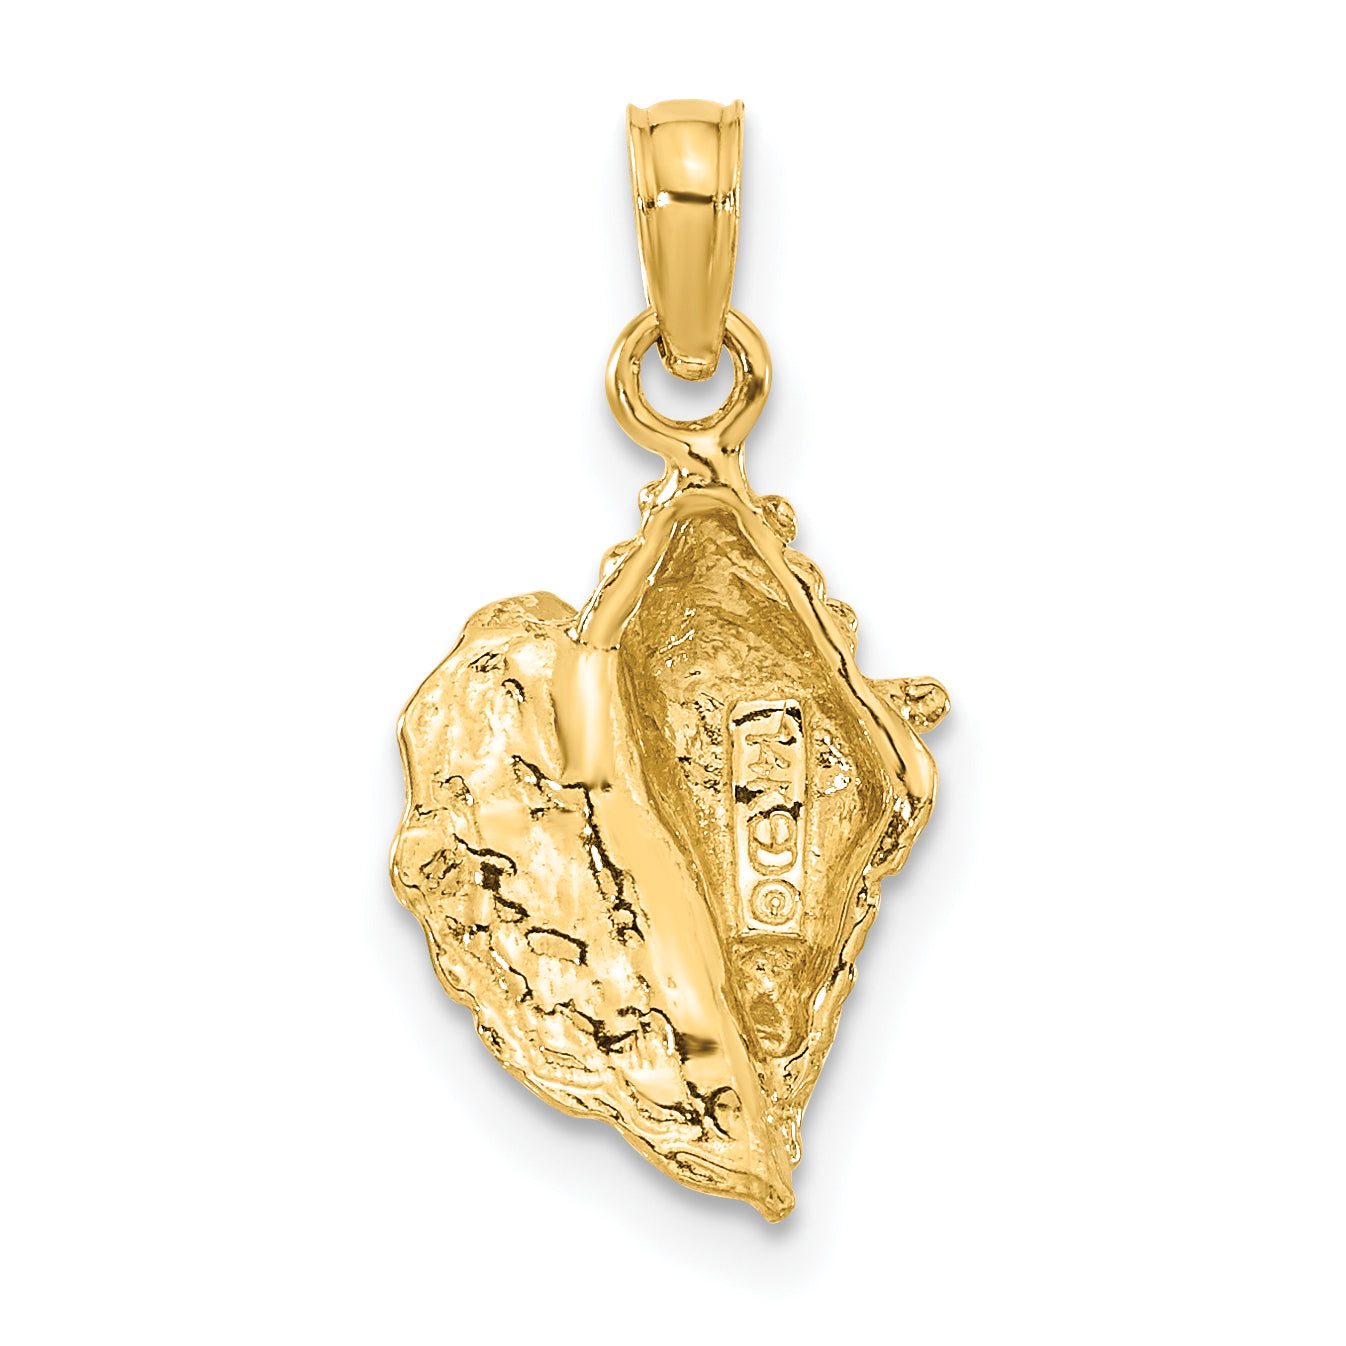 14k Solid Polished Conch Shell Pendant